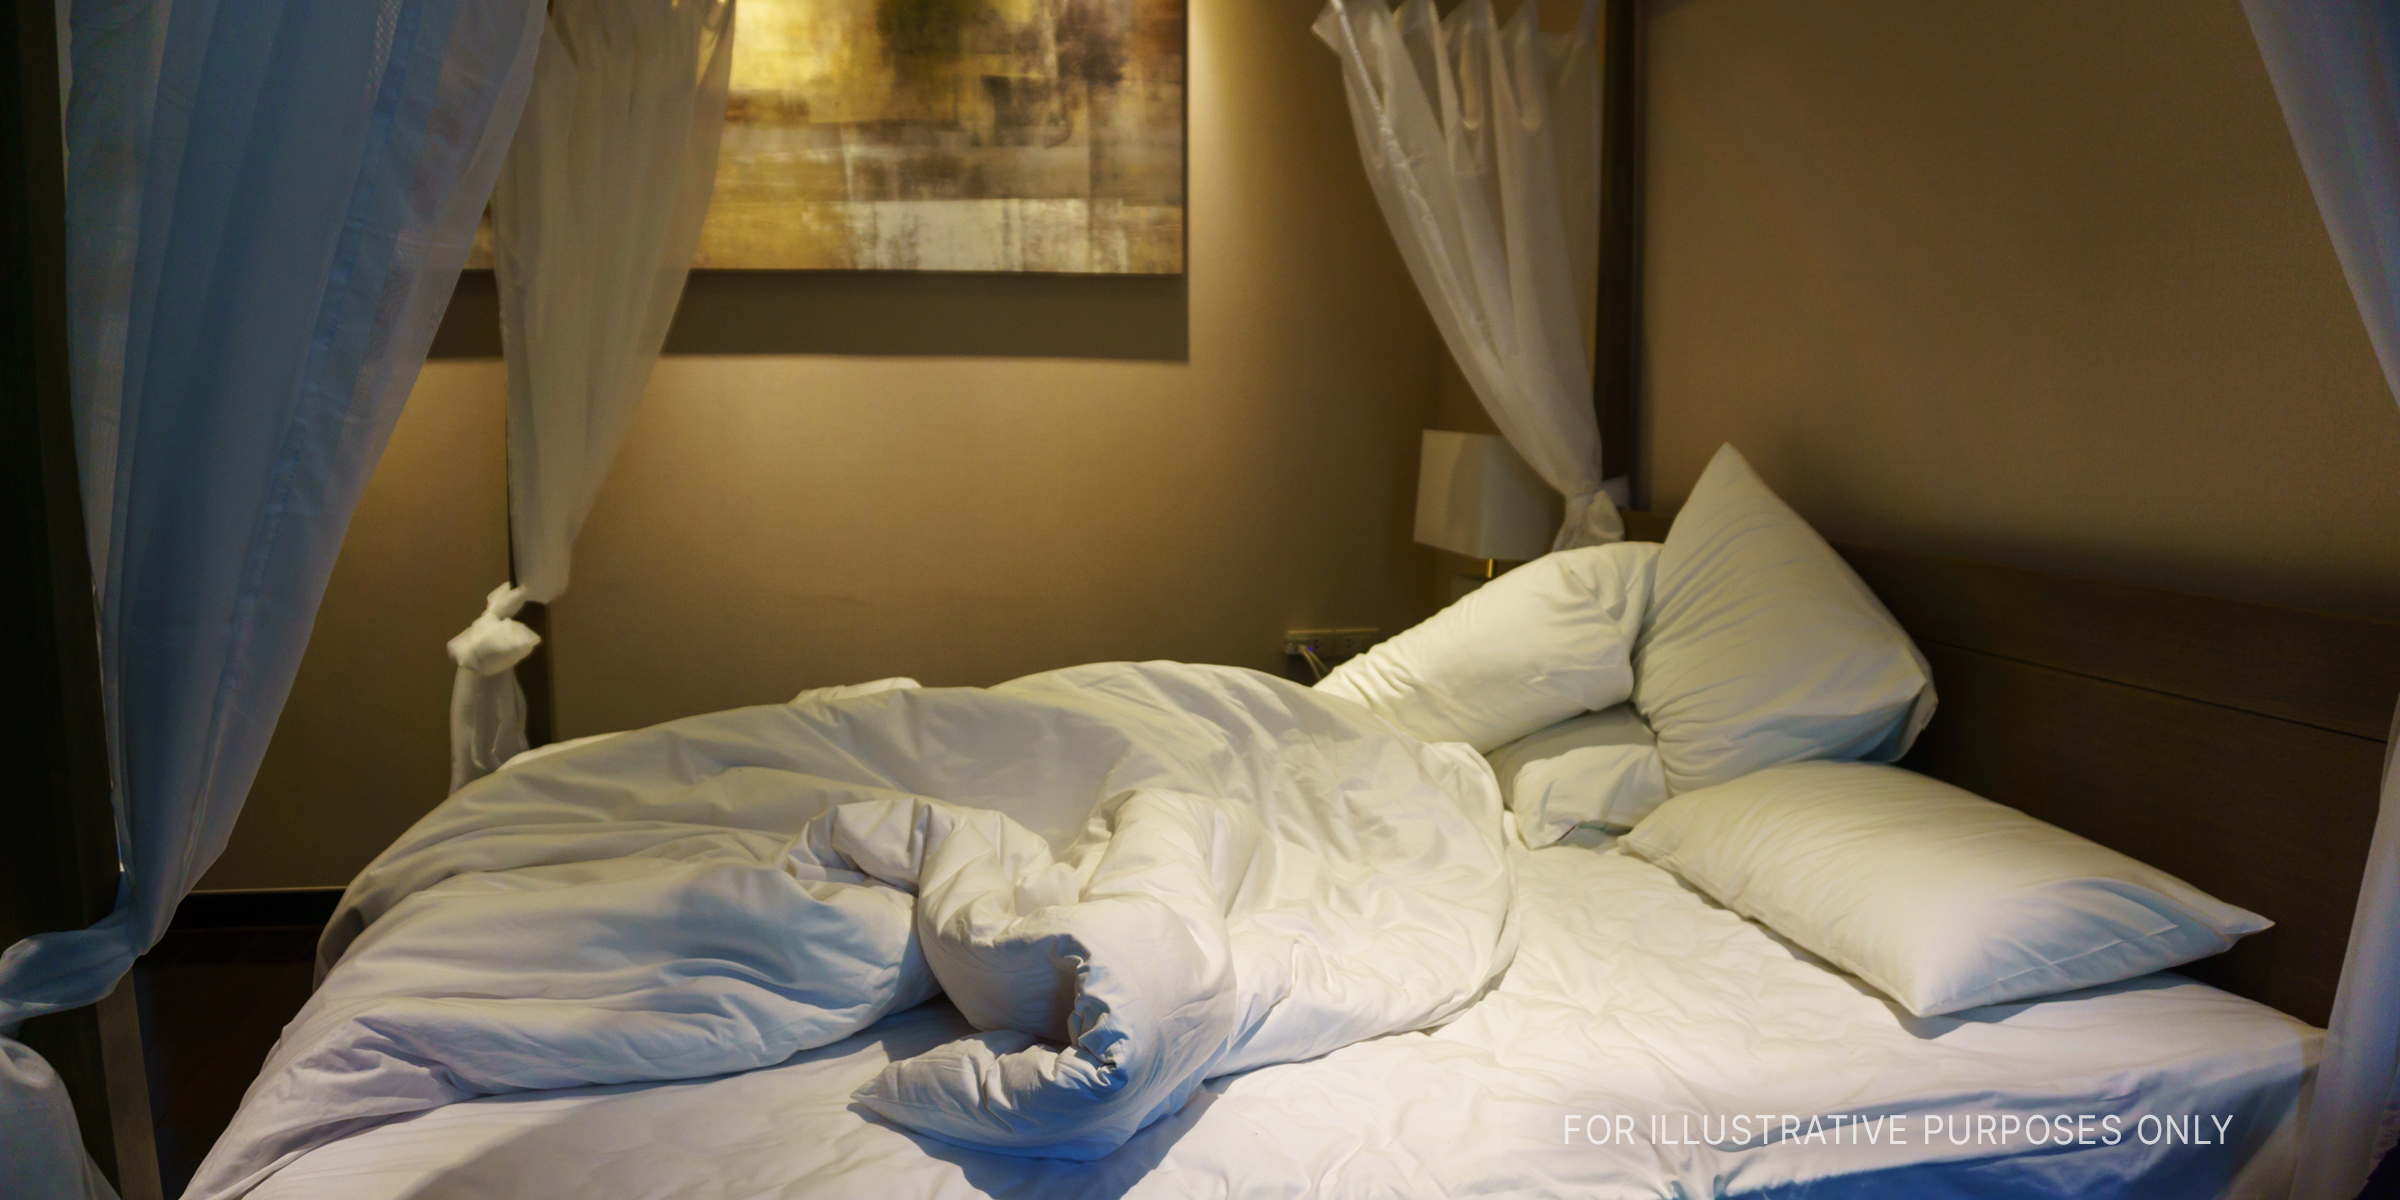 A messy bed | Source: Shutterstock